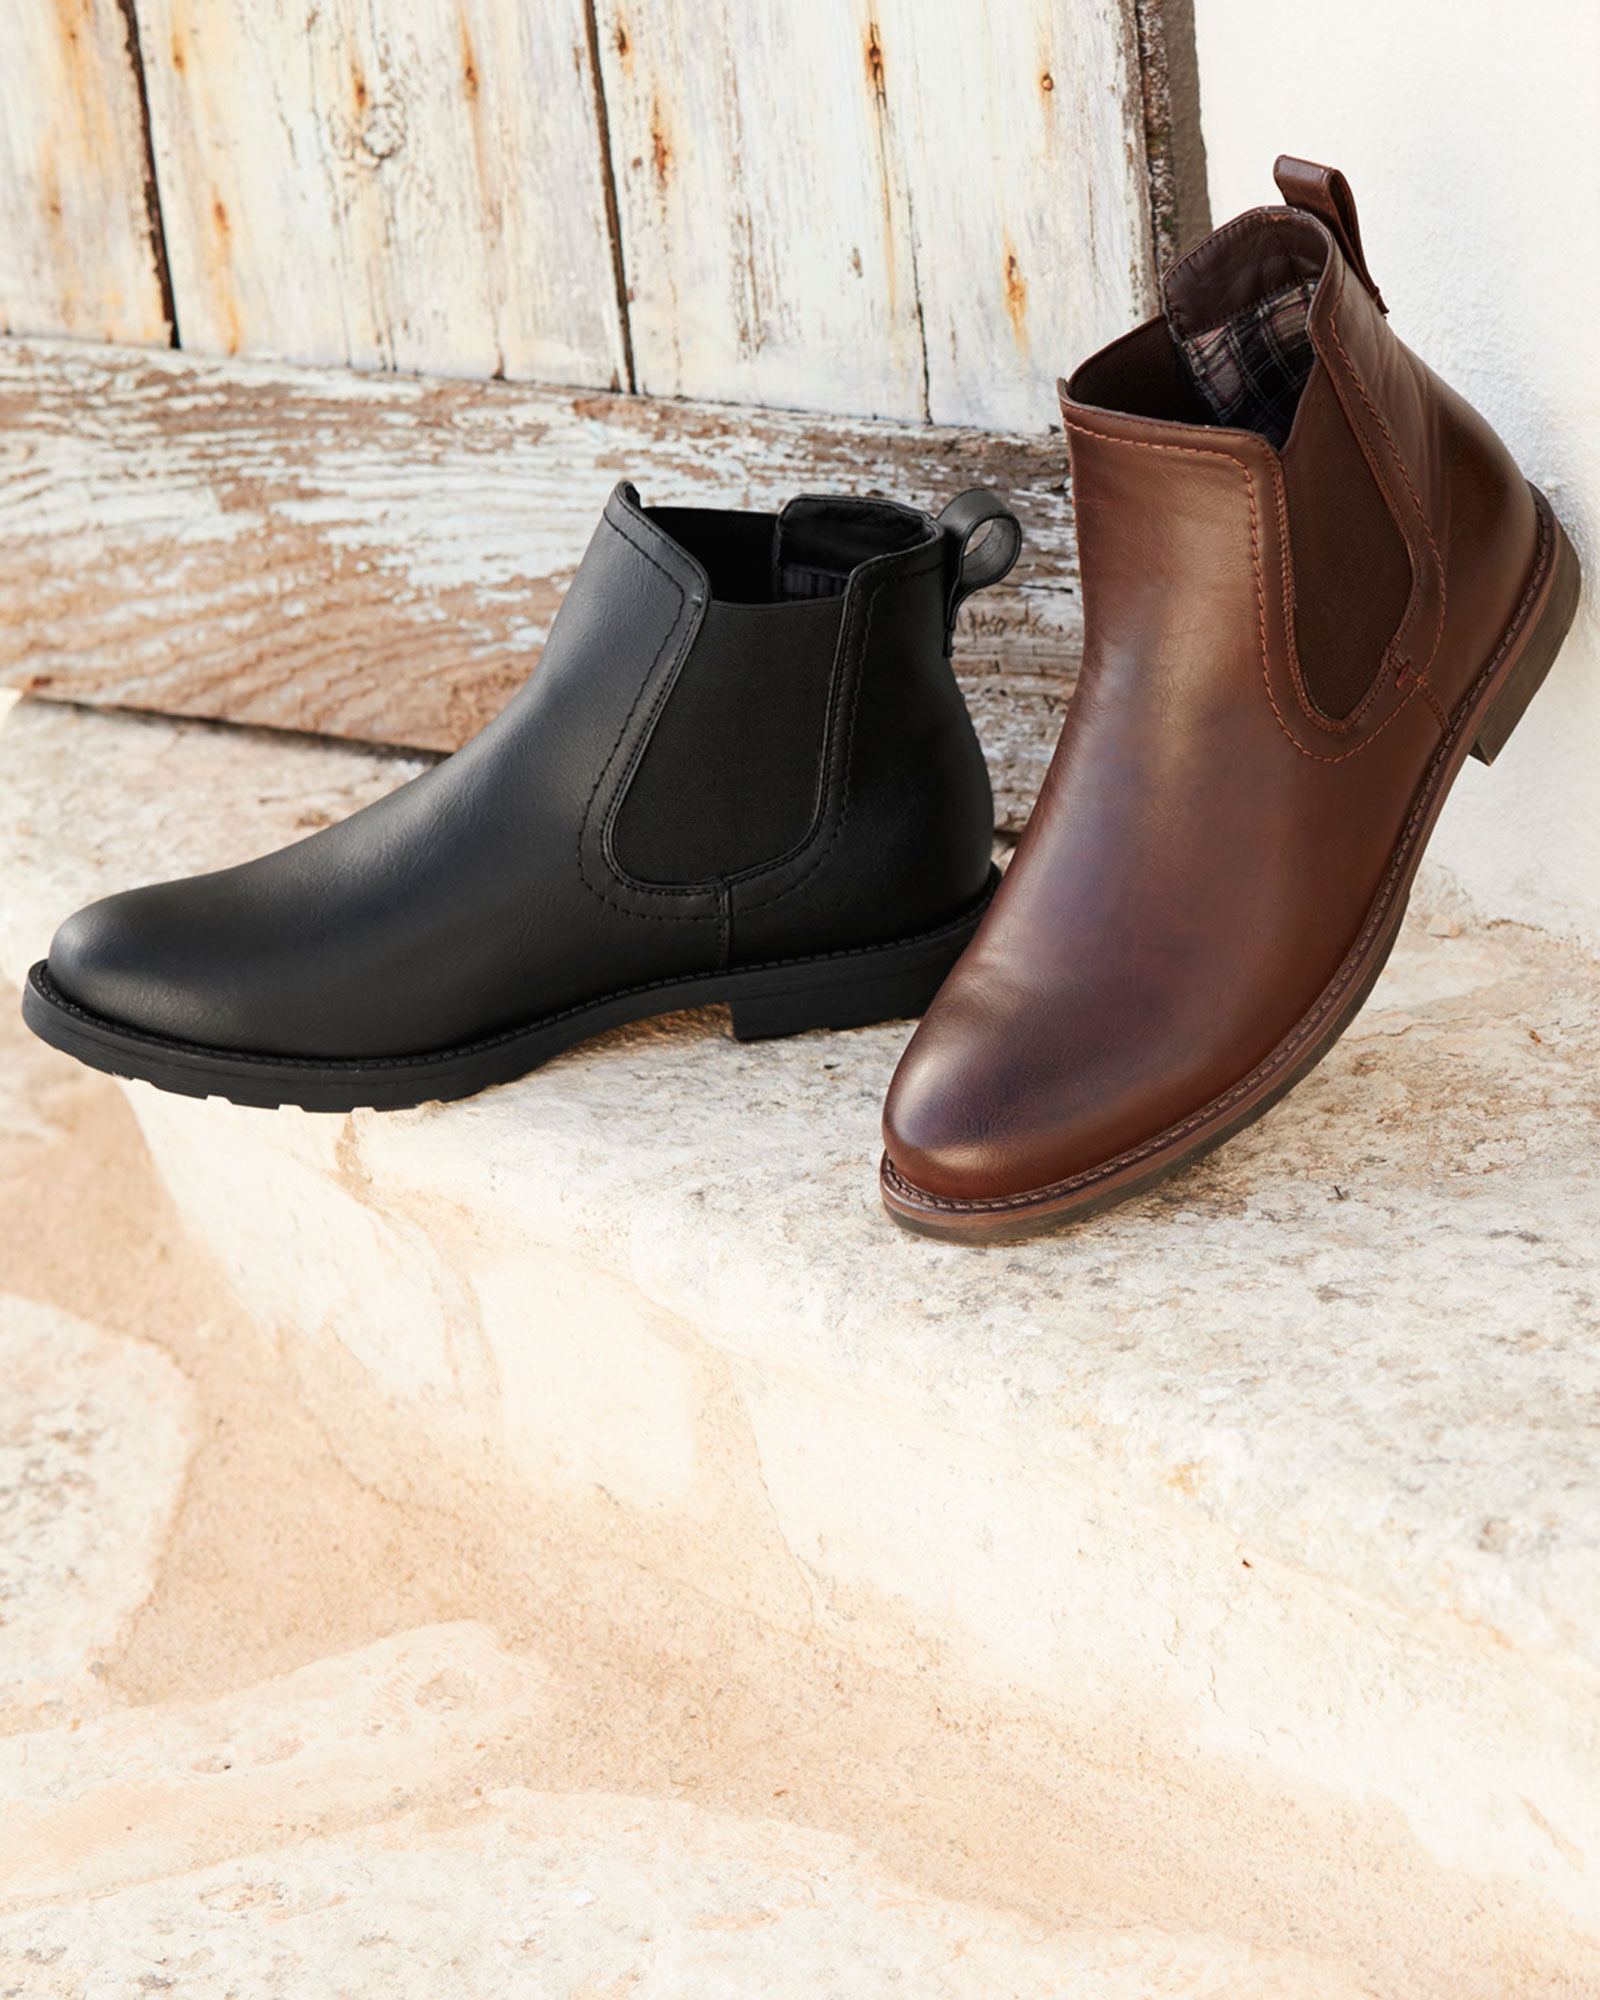 Pull-on Chelsea Boots at Cotton Traders